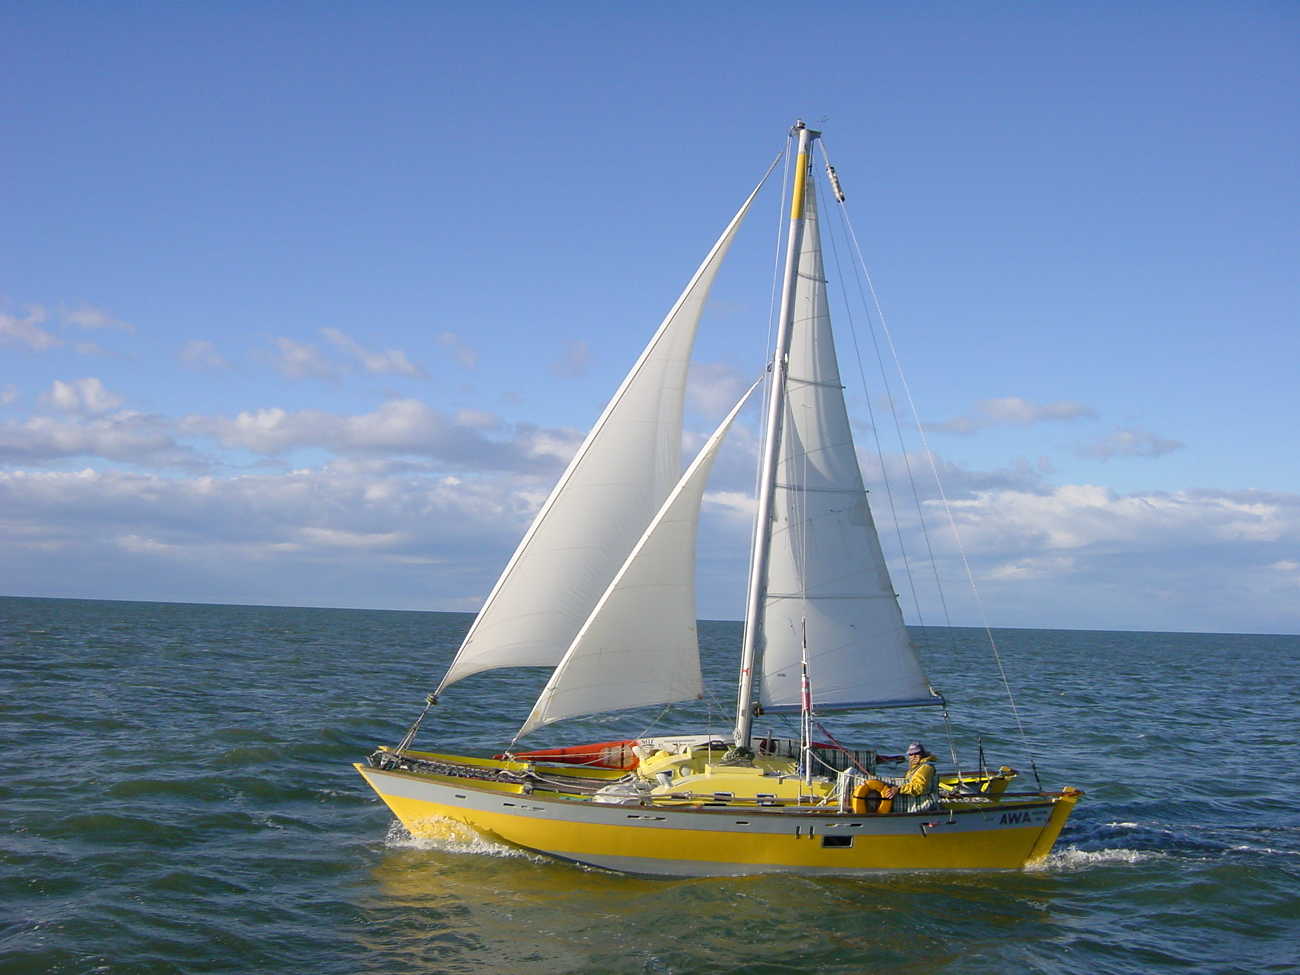 Yellow hulled Tanenui sailing out in the open, one man aboard